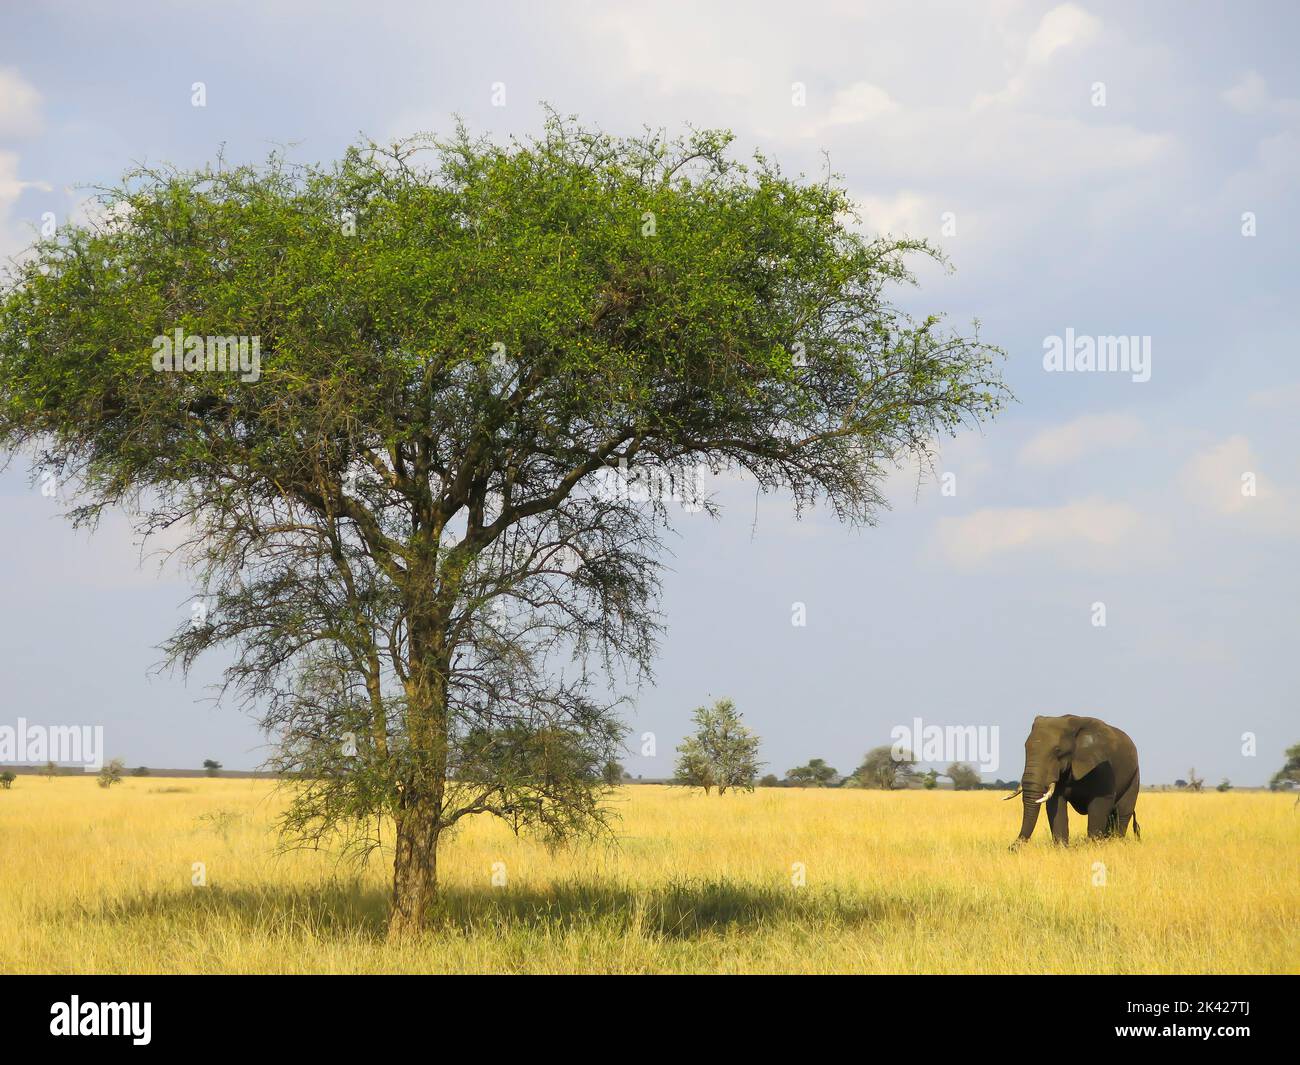 An Elephant on the Move in the Serengeti National Park Stock Photo